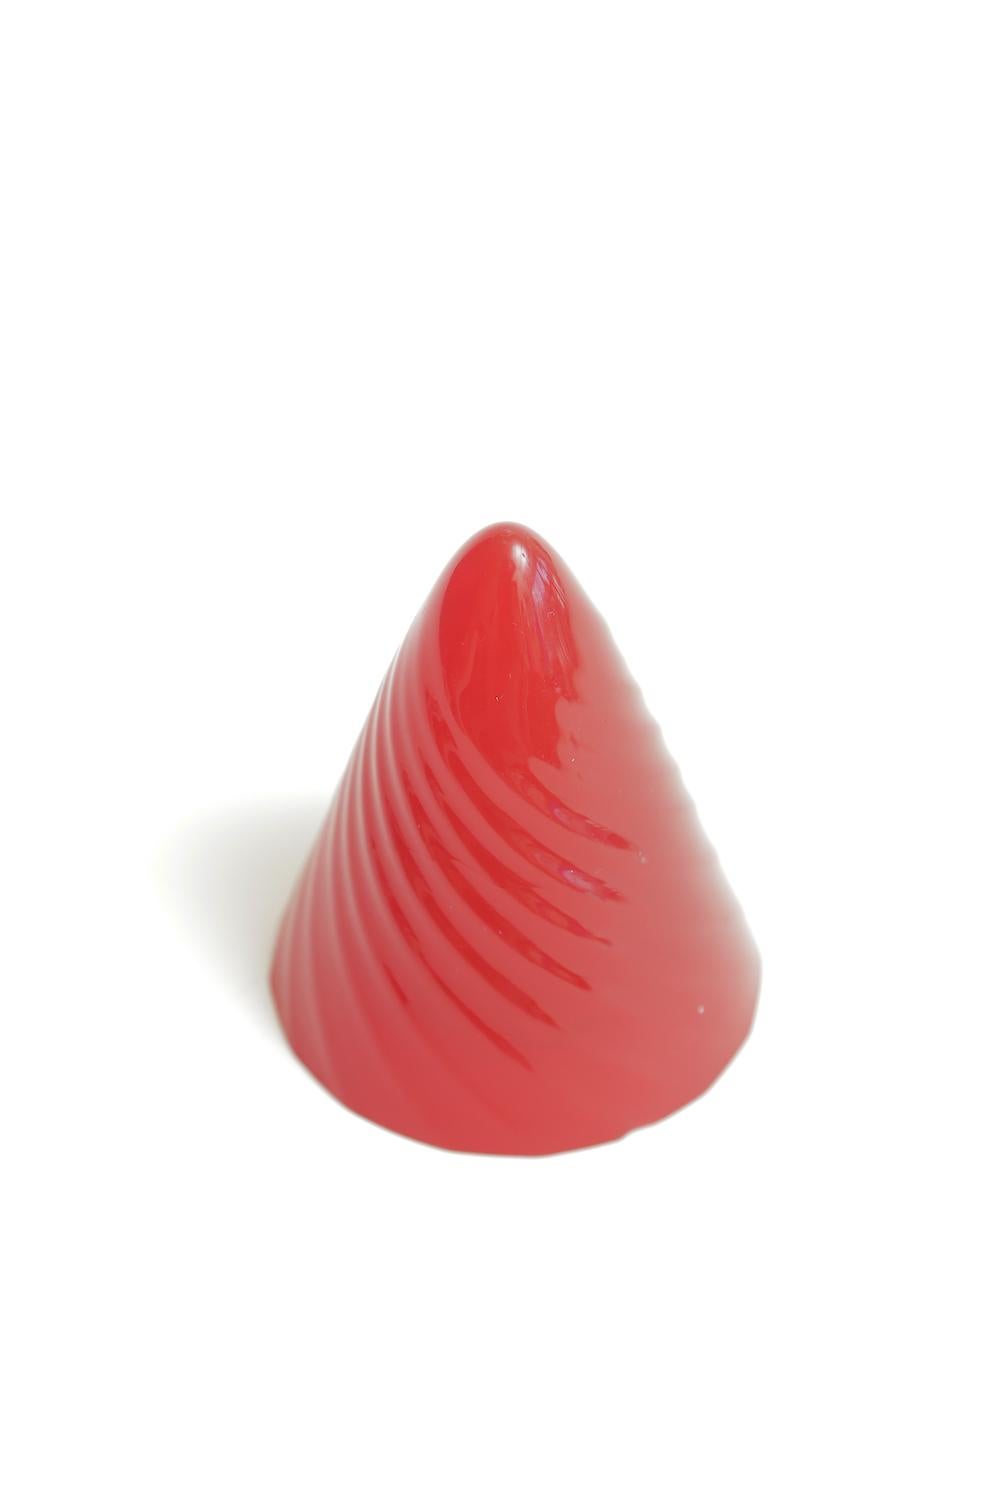 This wonderful Norman Mercer red Lucite conical form sculpture paperweight is from the 1990s. It has textural spirals. He was an engineer turned artist from NYC. His major lucite sculptures are very coveted as he is no longer living. The original